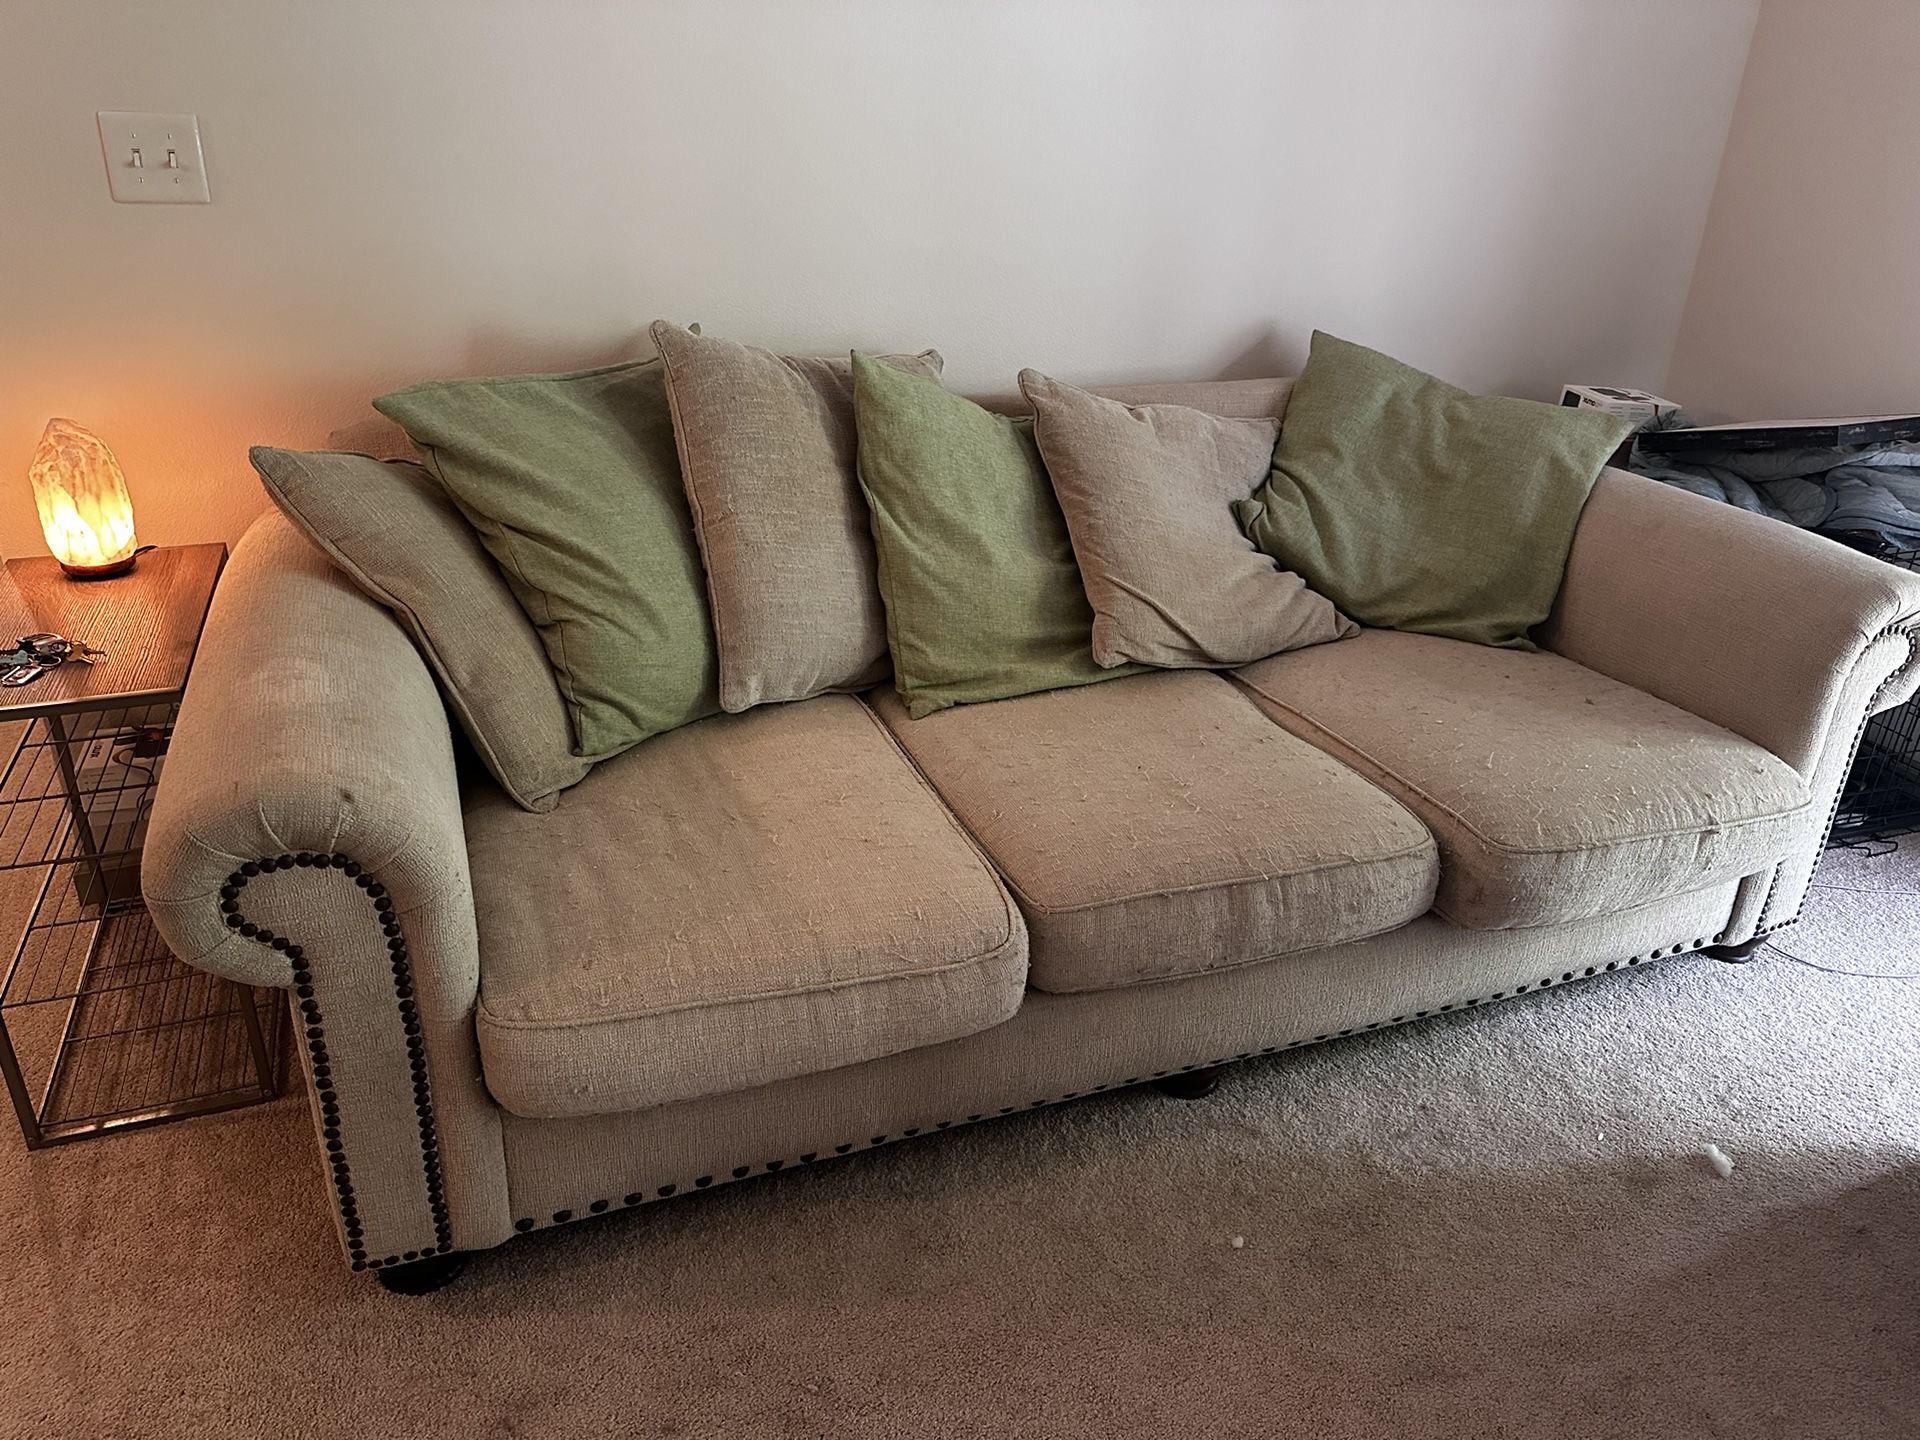 FREE COUCH & PILLOWS